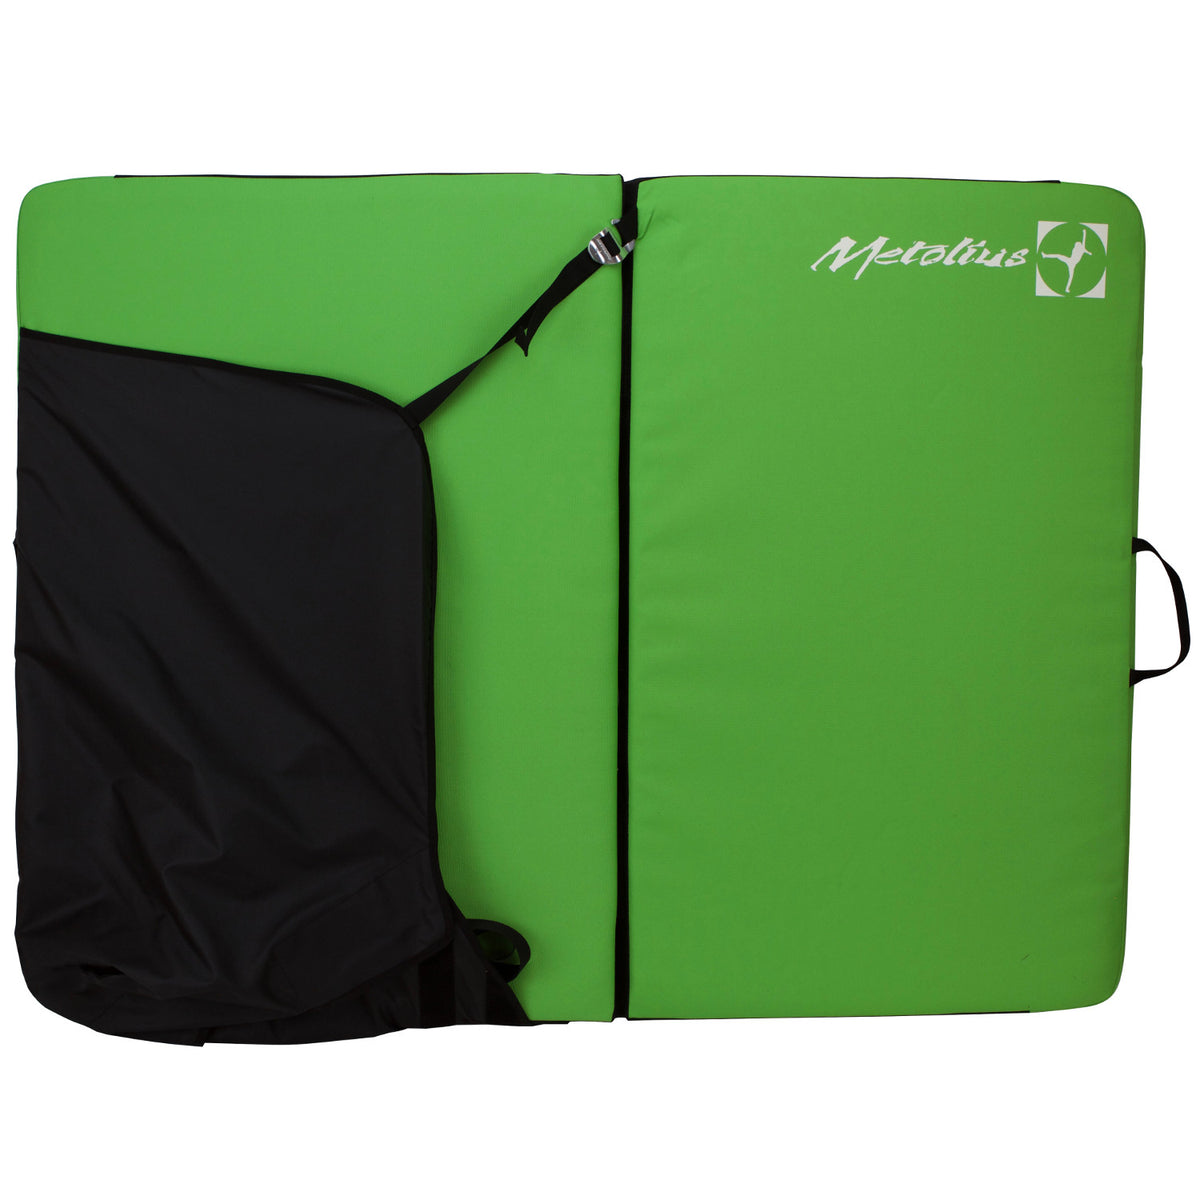 Metolius Session II crash pad, shown stood up and open